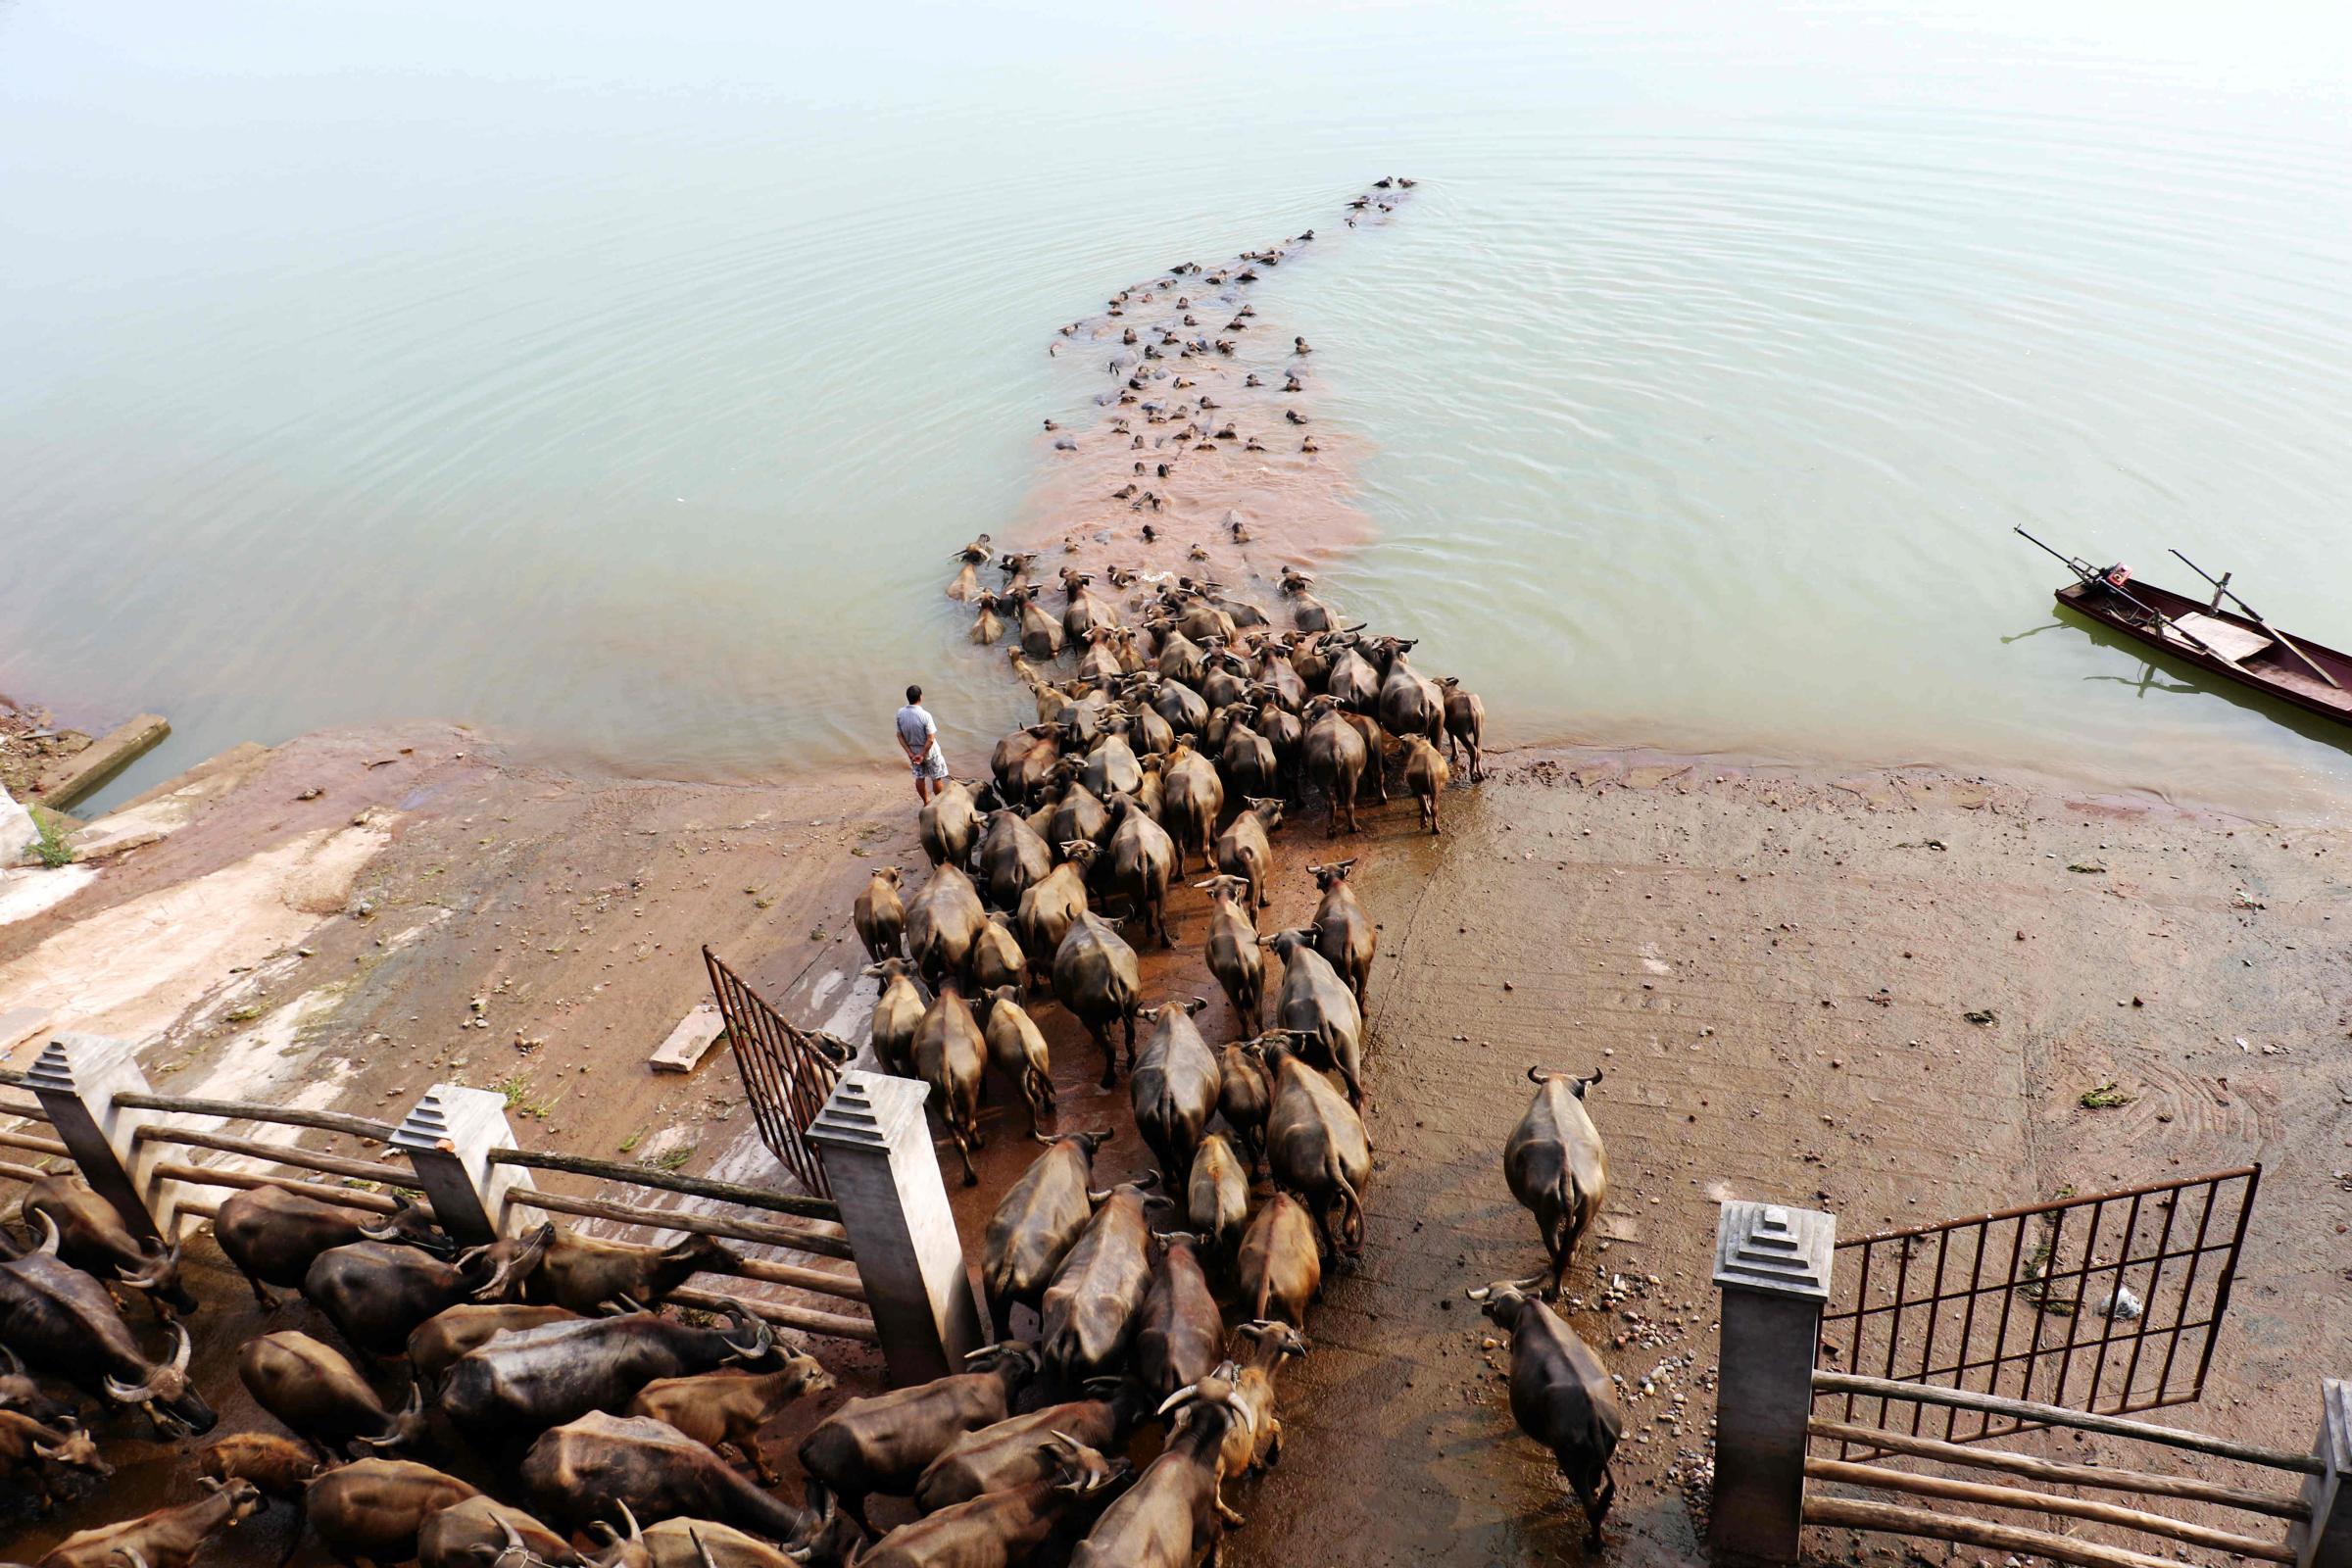 A man watches buffalos cross a river as they head to another grazing area in Nanchong, China, on Aug. 10, 2016.